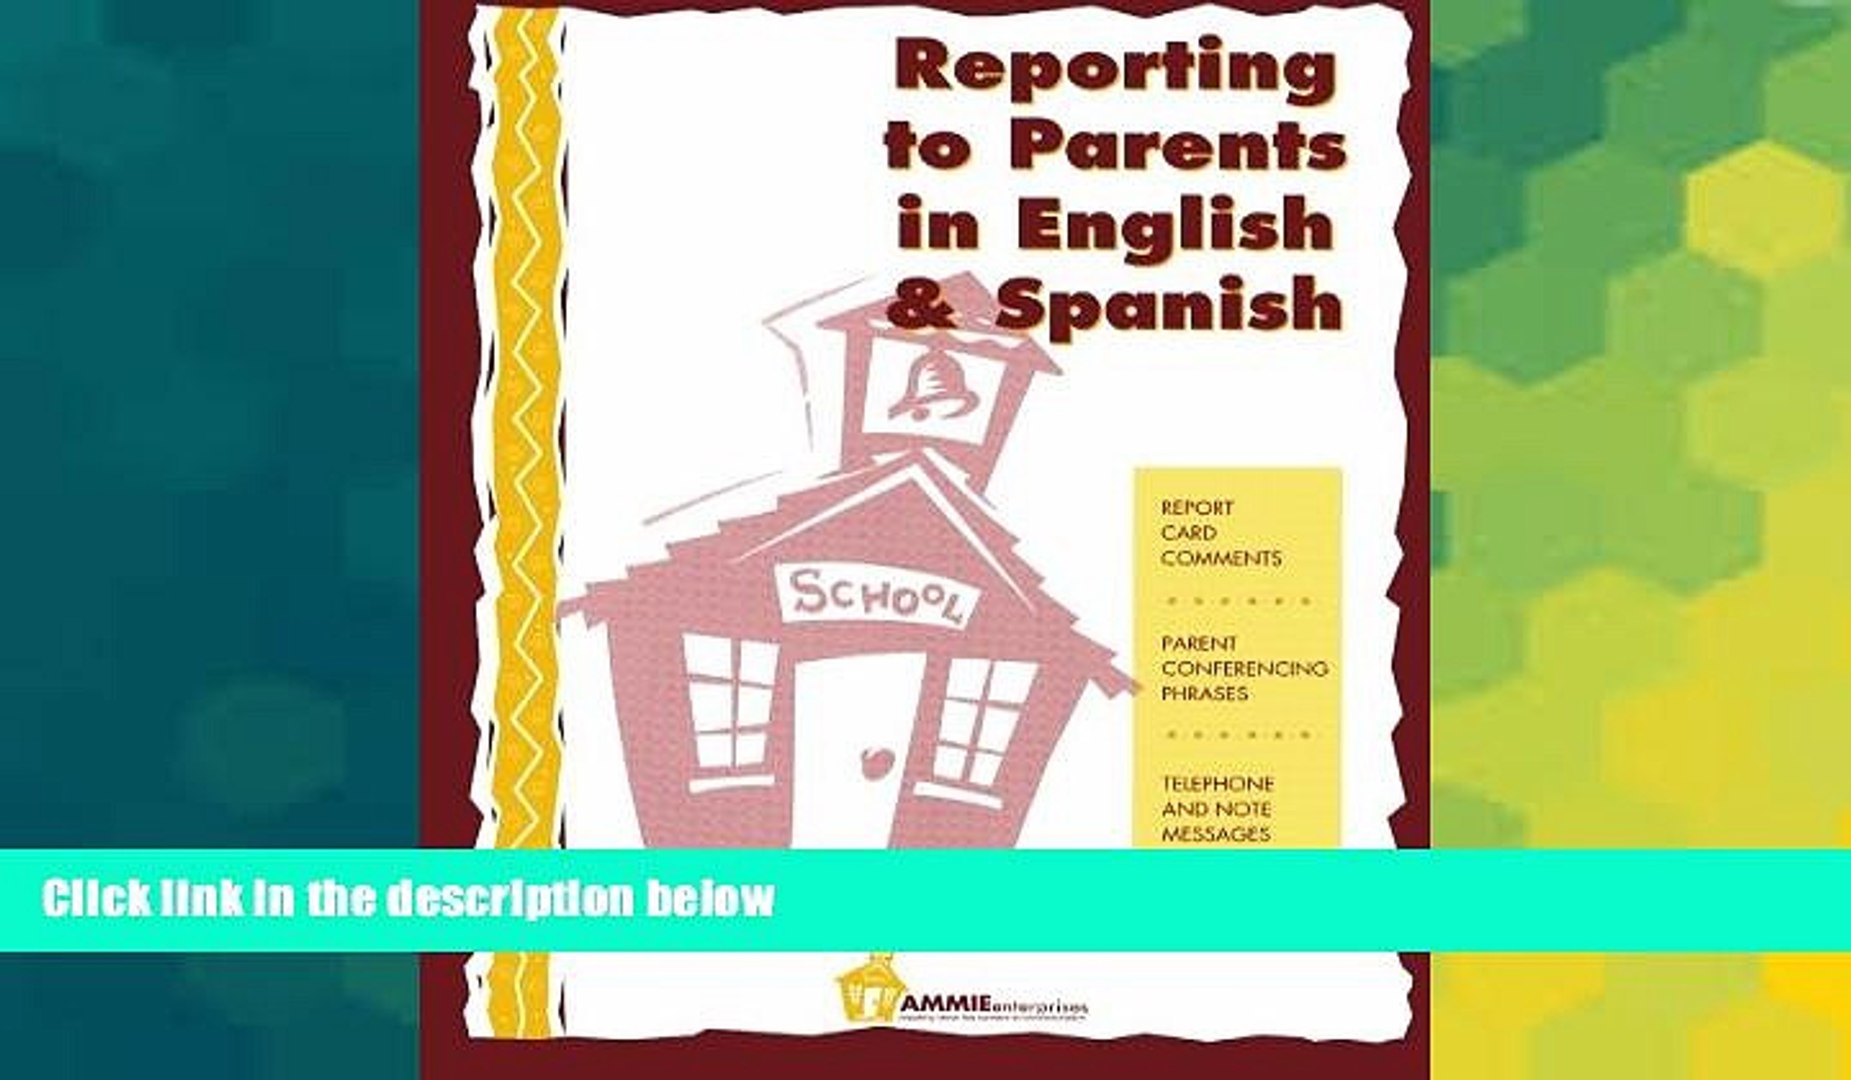 Big Deals  Reporting to Parents in English and Spanish: A time saving tool for school teachers in